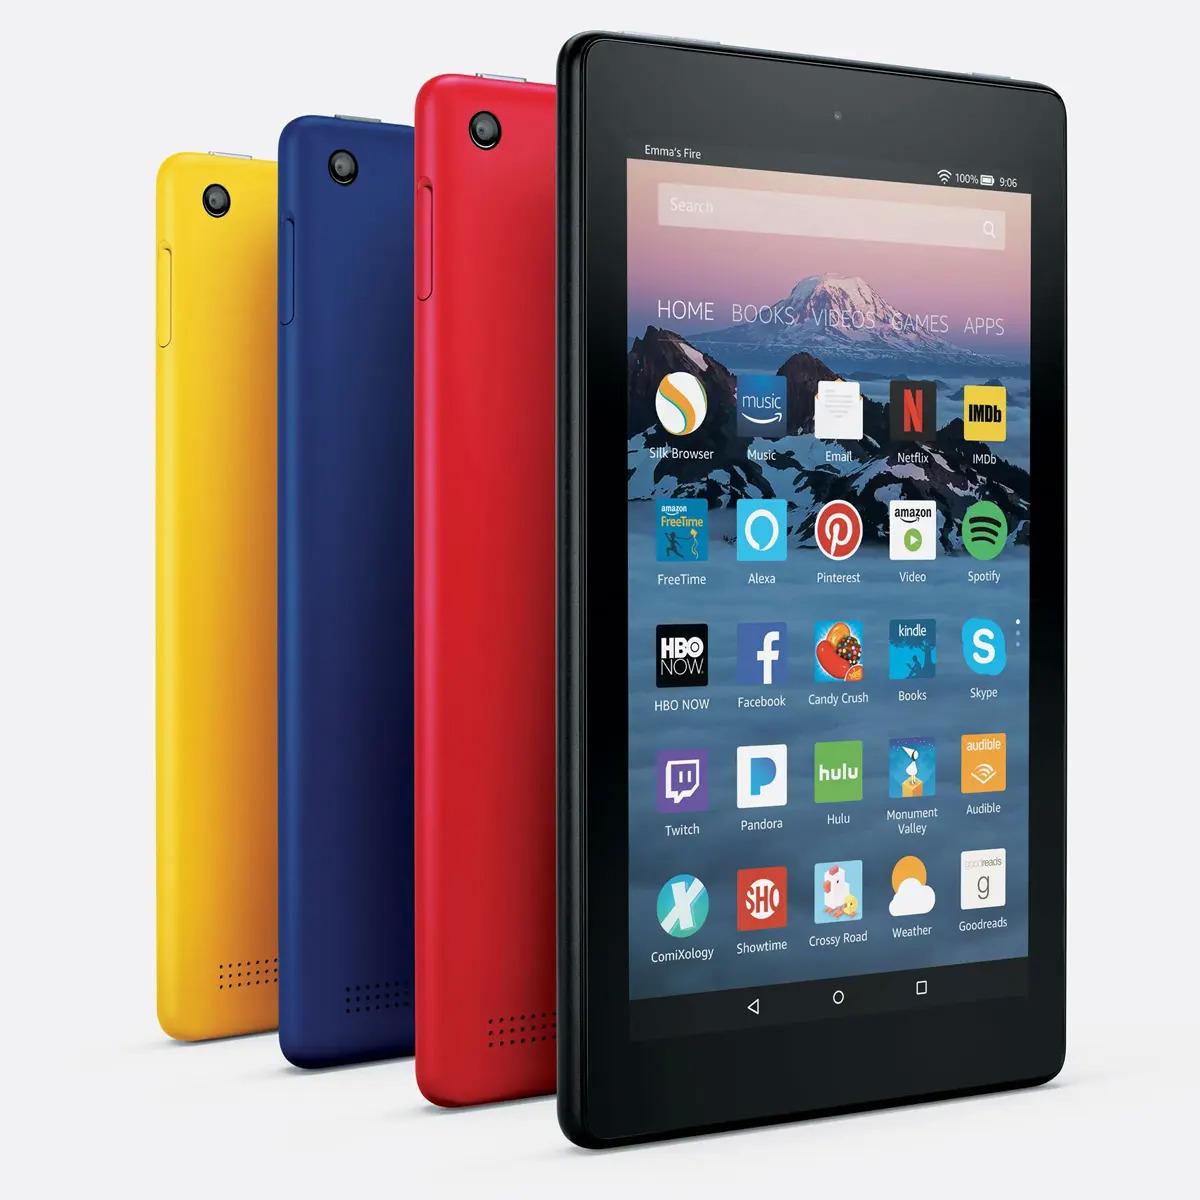 Amazon Refurbished Fire Tablets from $14.99